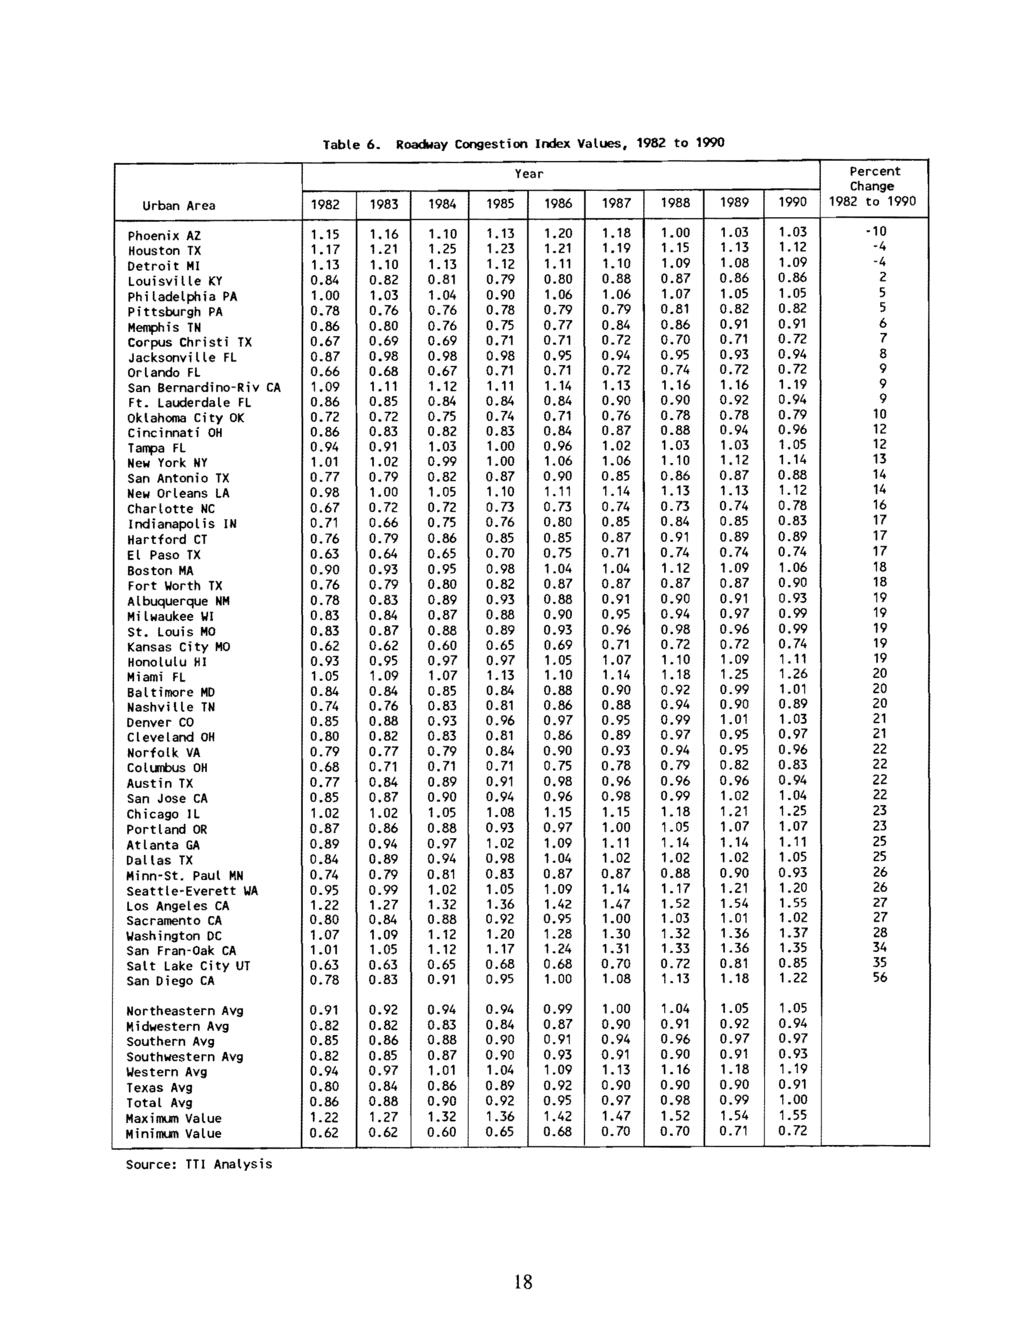 Table 6. Roadway Congestion Index Values, 1982 to 1990 Year Urban Area 1982 1983 1984 1985 1986 1987 1988 ~ 1990 Percent Change 1982 to 1990 Phoenix AZ 1.15 1.16 1.10 1.13 1.20 1.18 1.00 1.03 1.